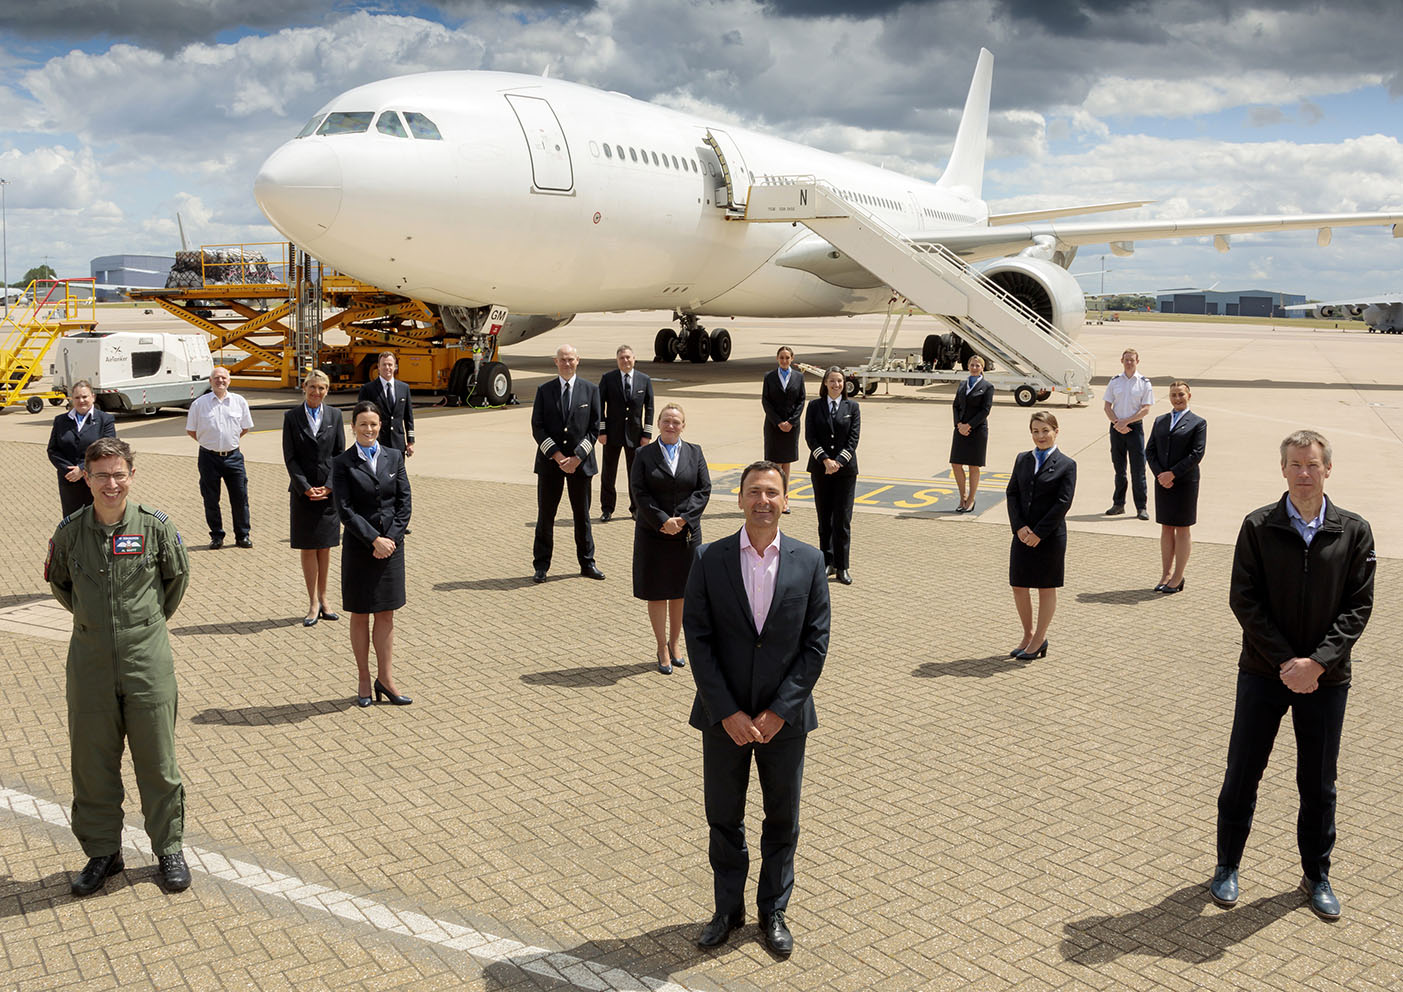 A number of air crew stood in suits and professional attire stood in front of a large airplane on a runway